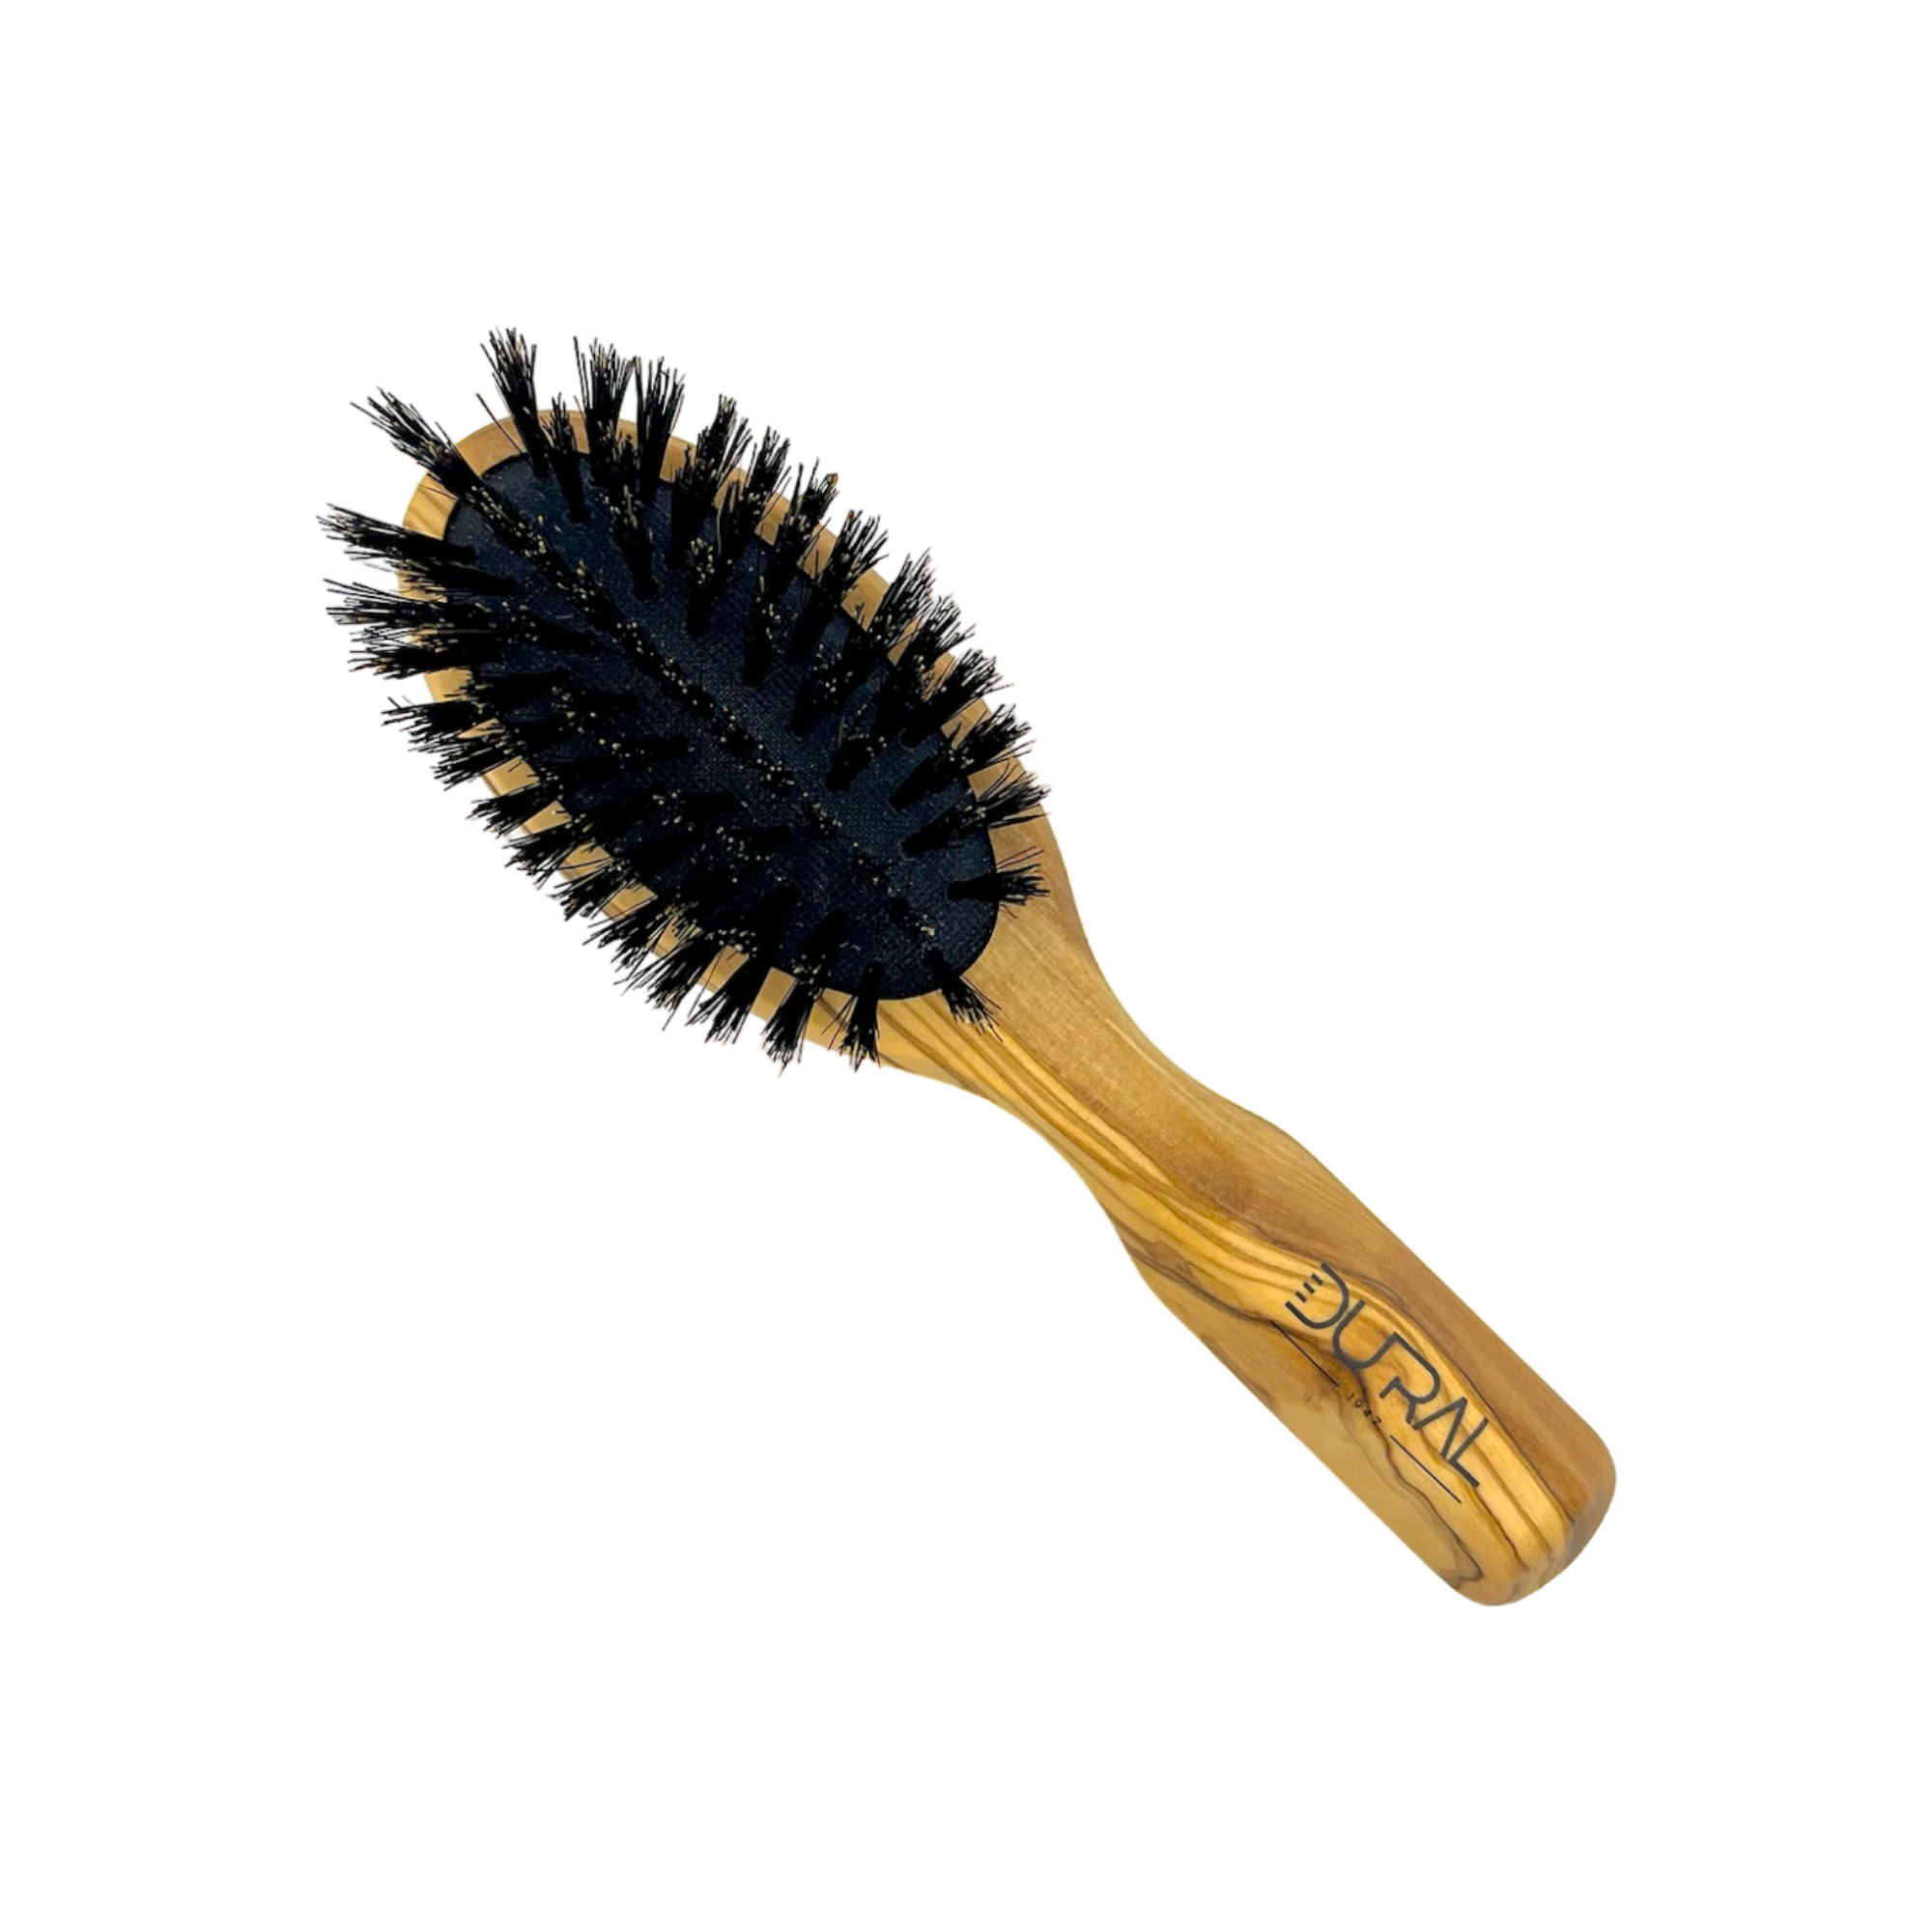 Dural Olive Wood rubber cushion hair brush with boar bristles